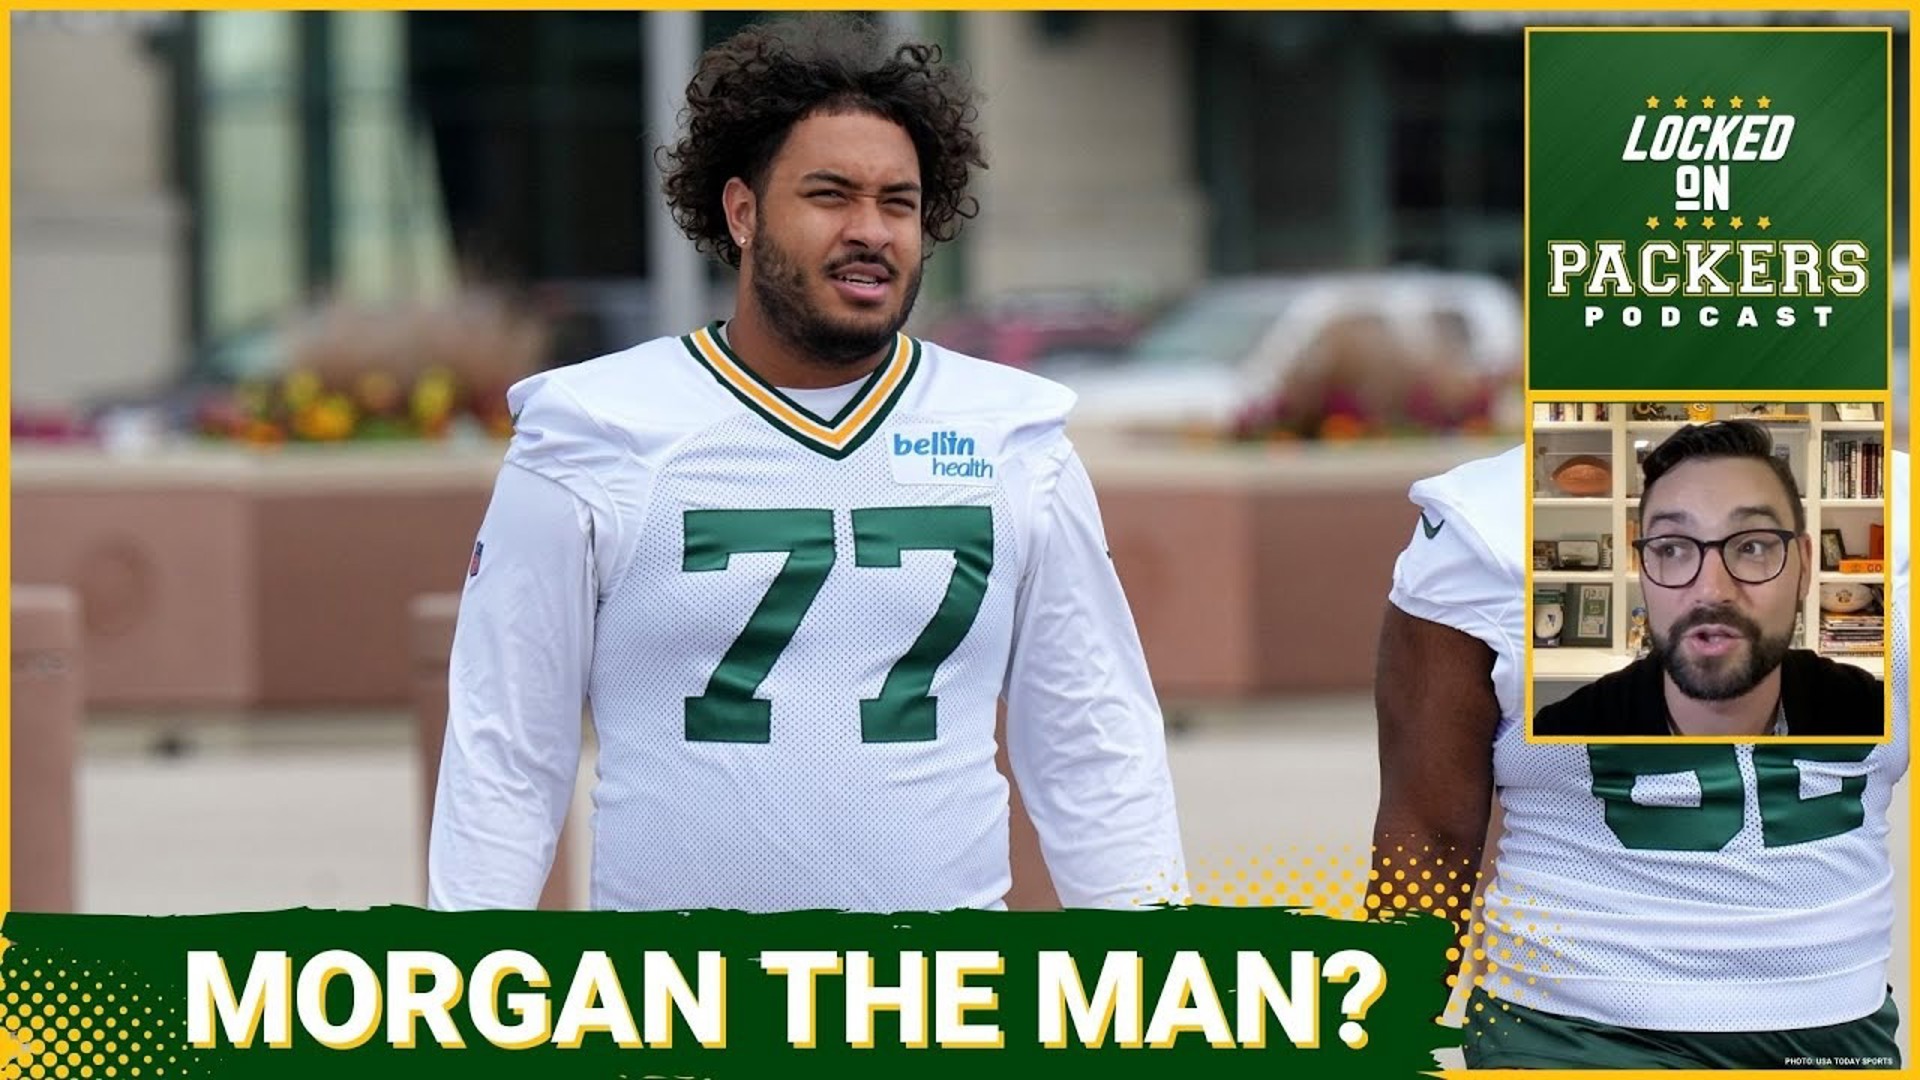 Jordan Morgan won't play center for Green Bay, but he will decide the guy who will.